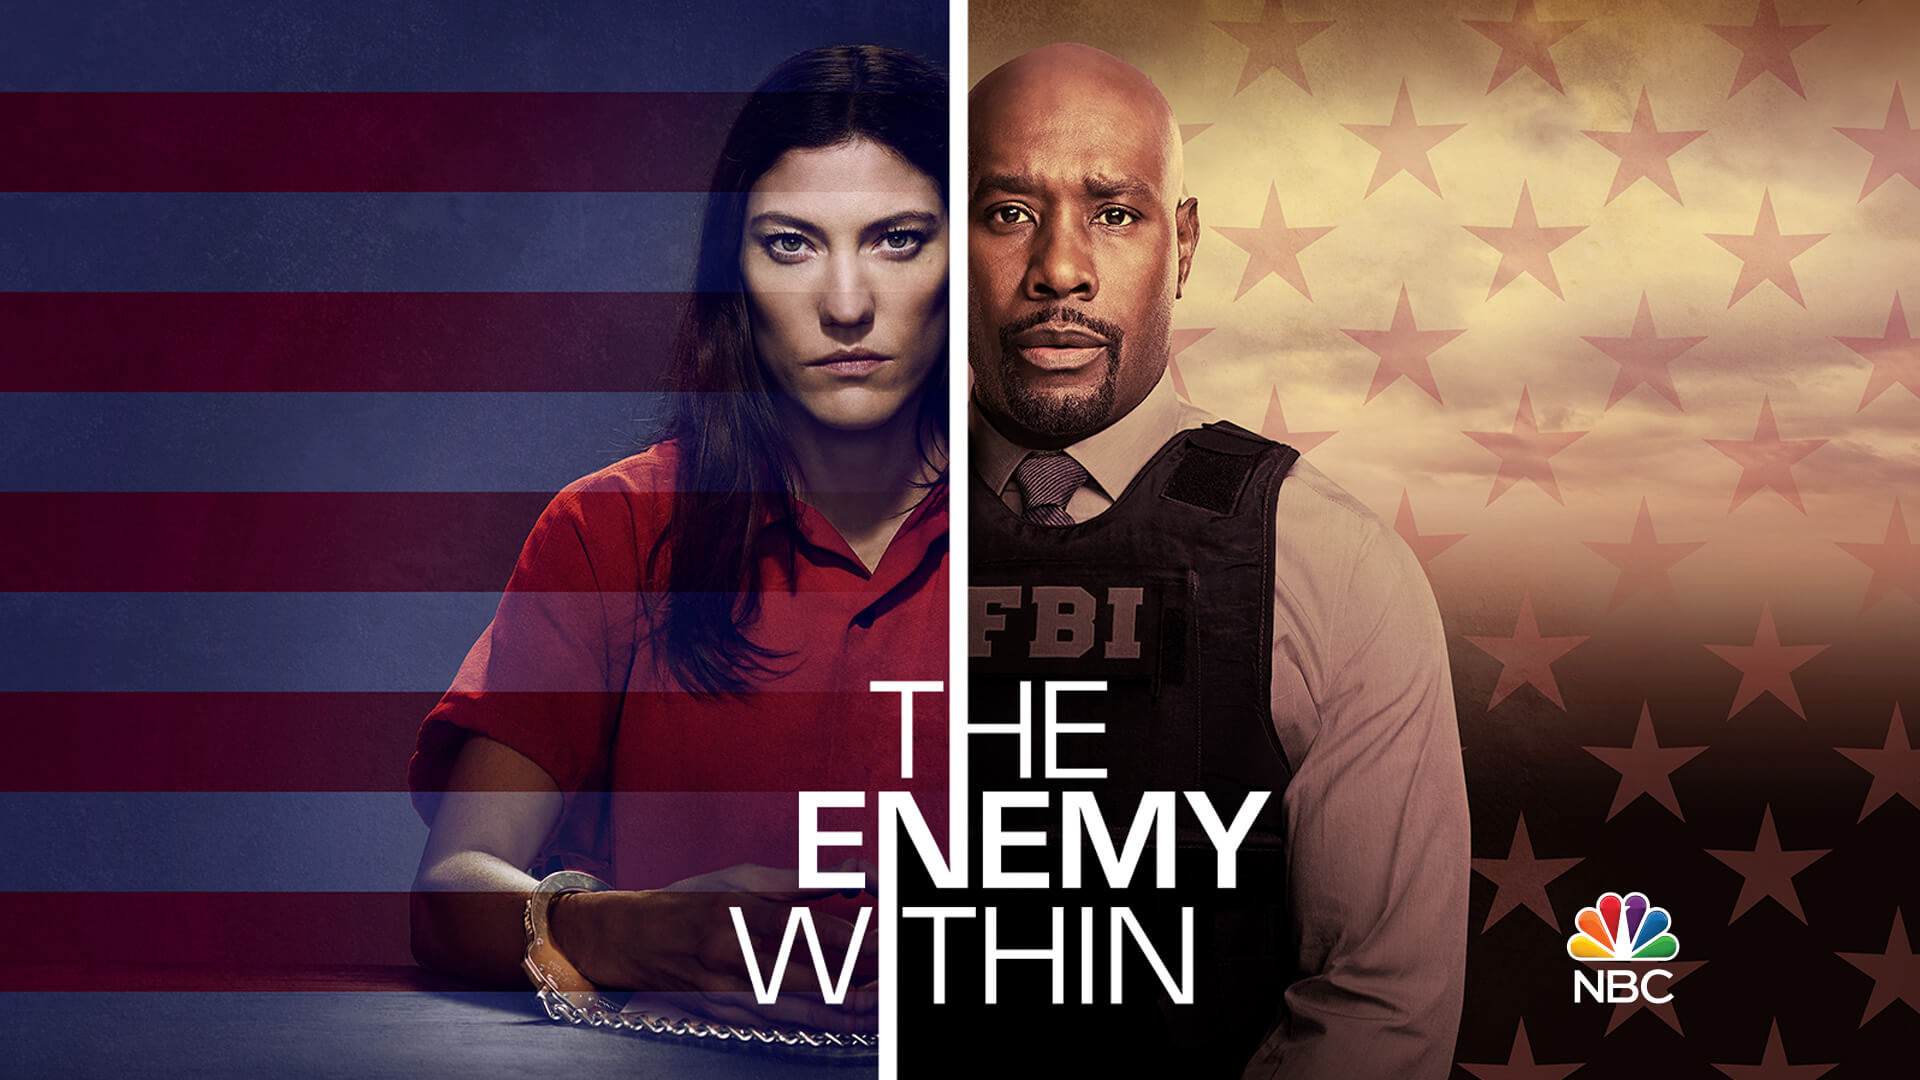 The Enemy Within season 2 release date